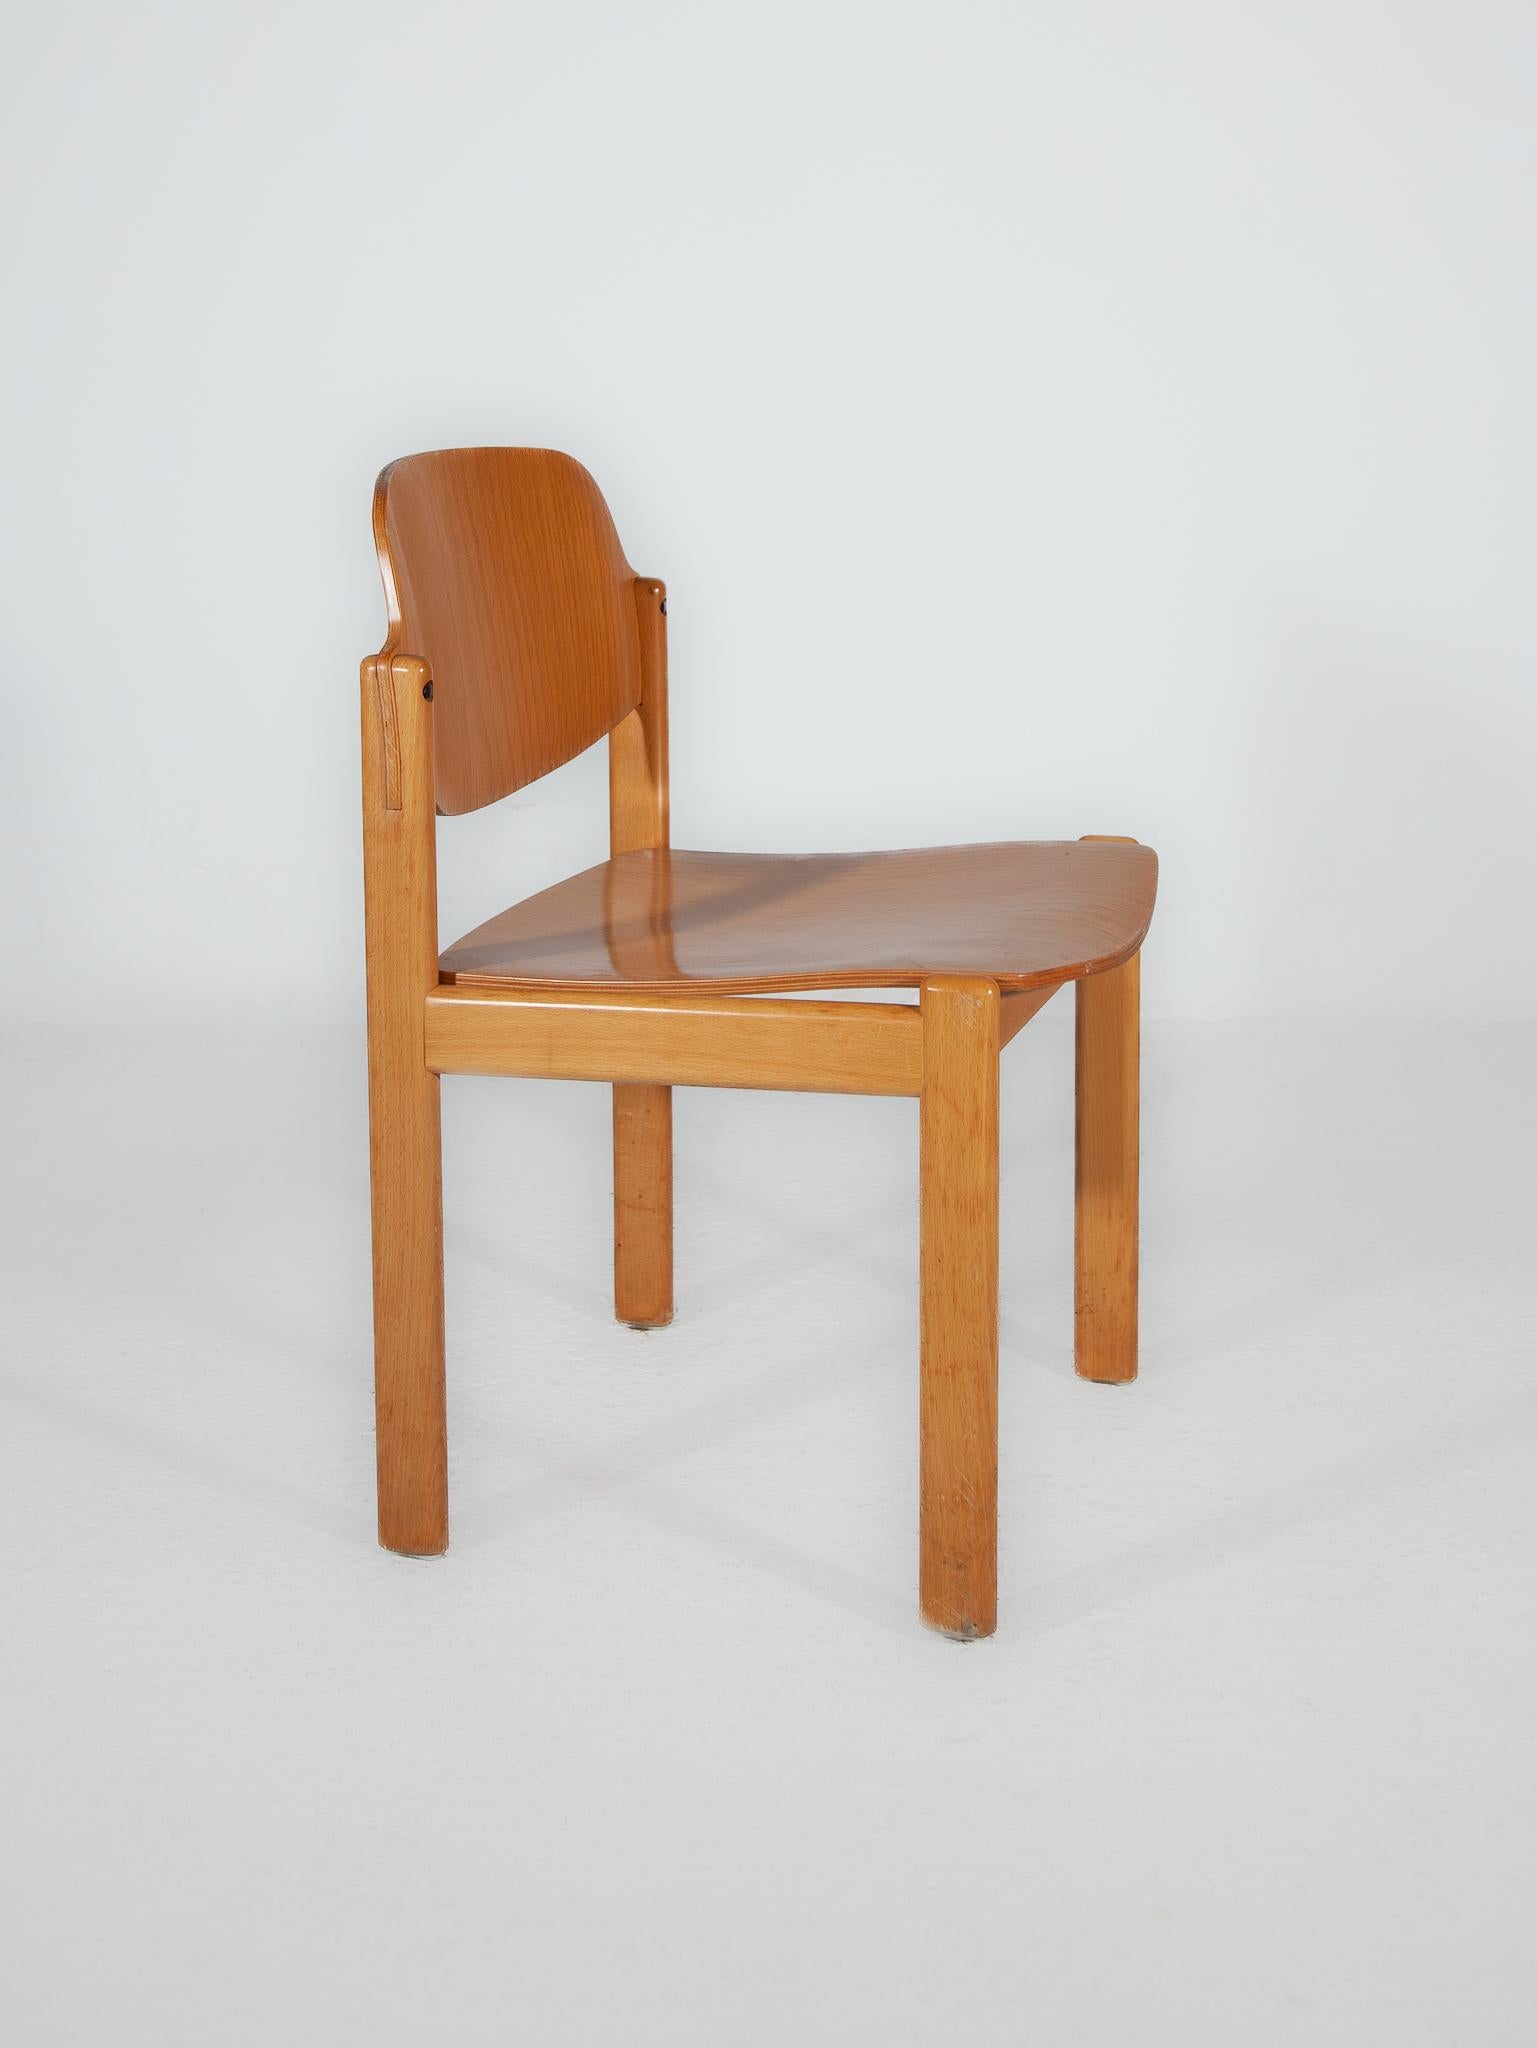 Hand-Crafted Set of Twelve Beech Wood Dining Chairs, Germany 1970s For Sale